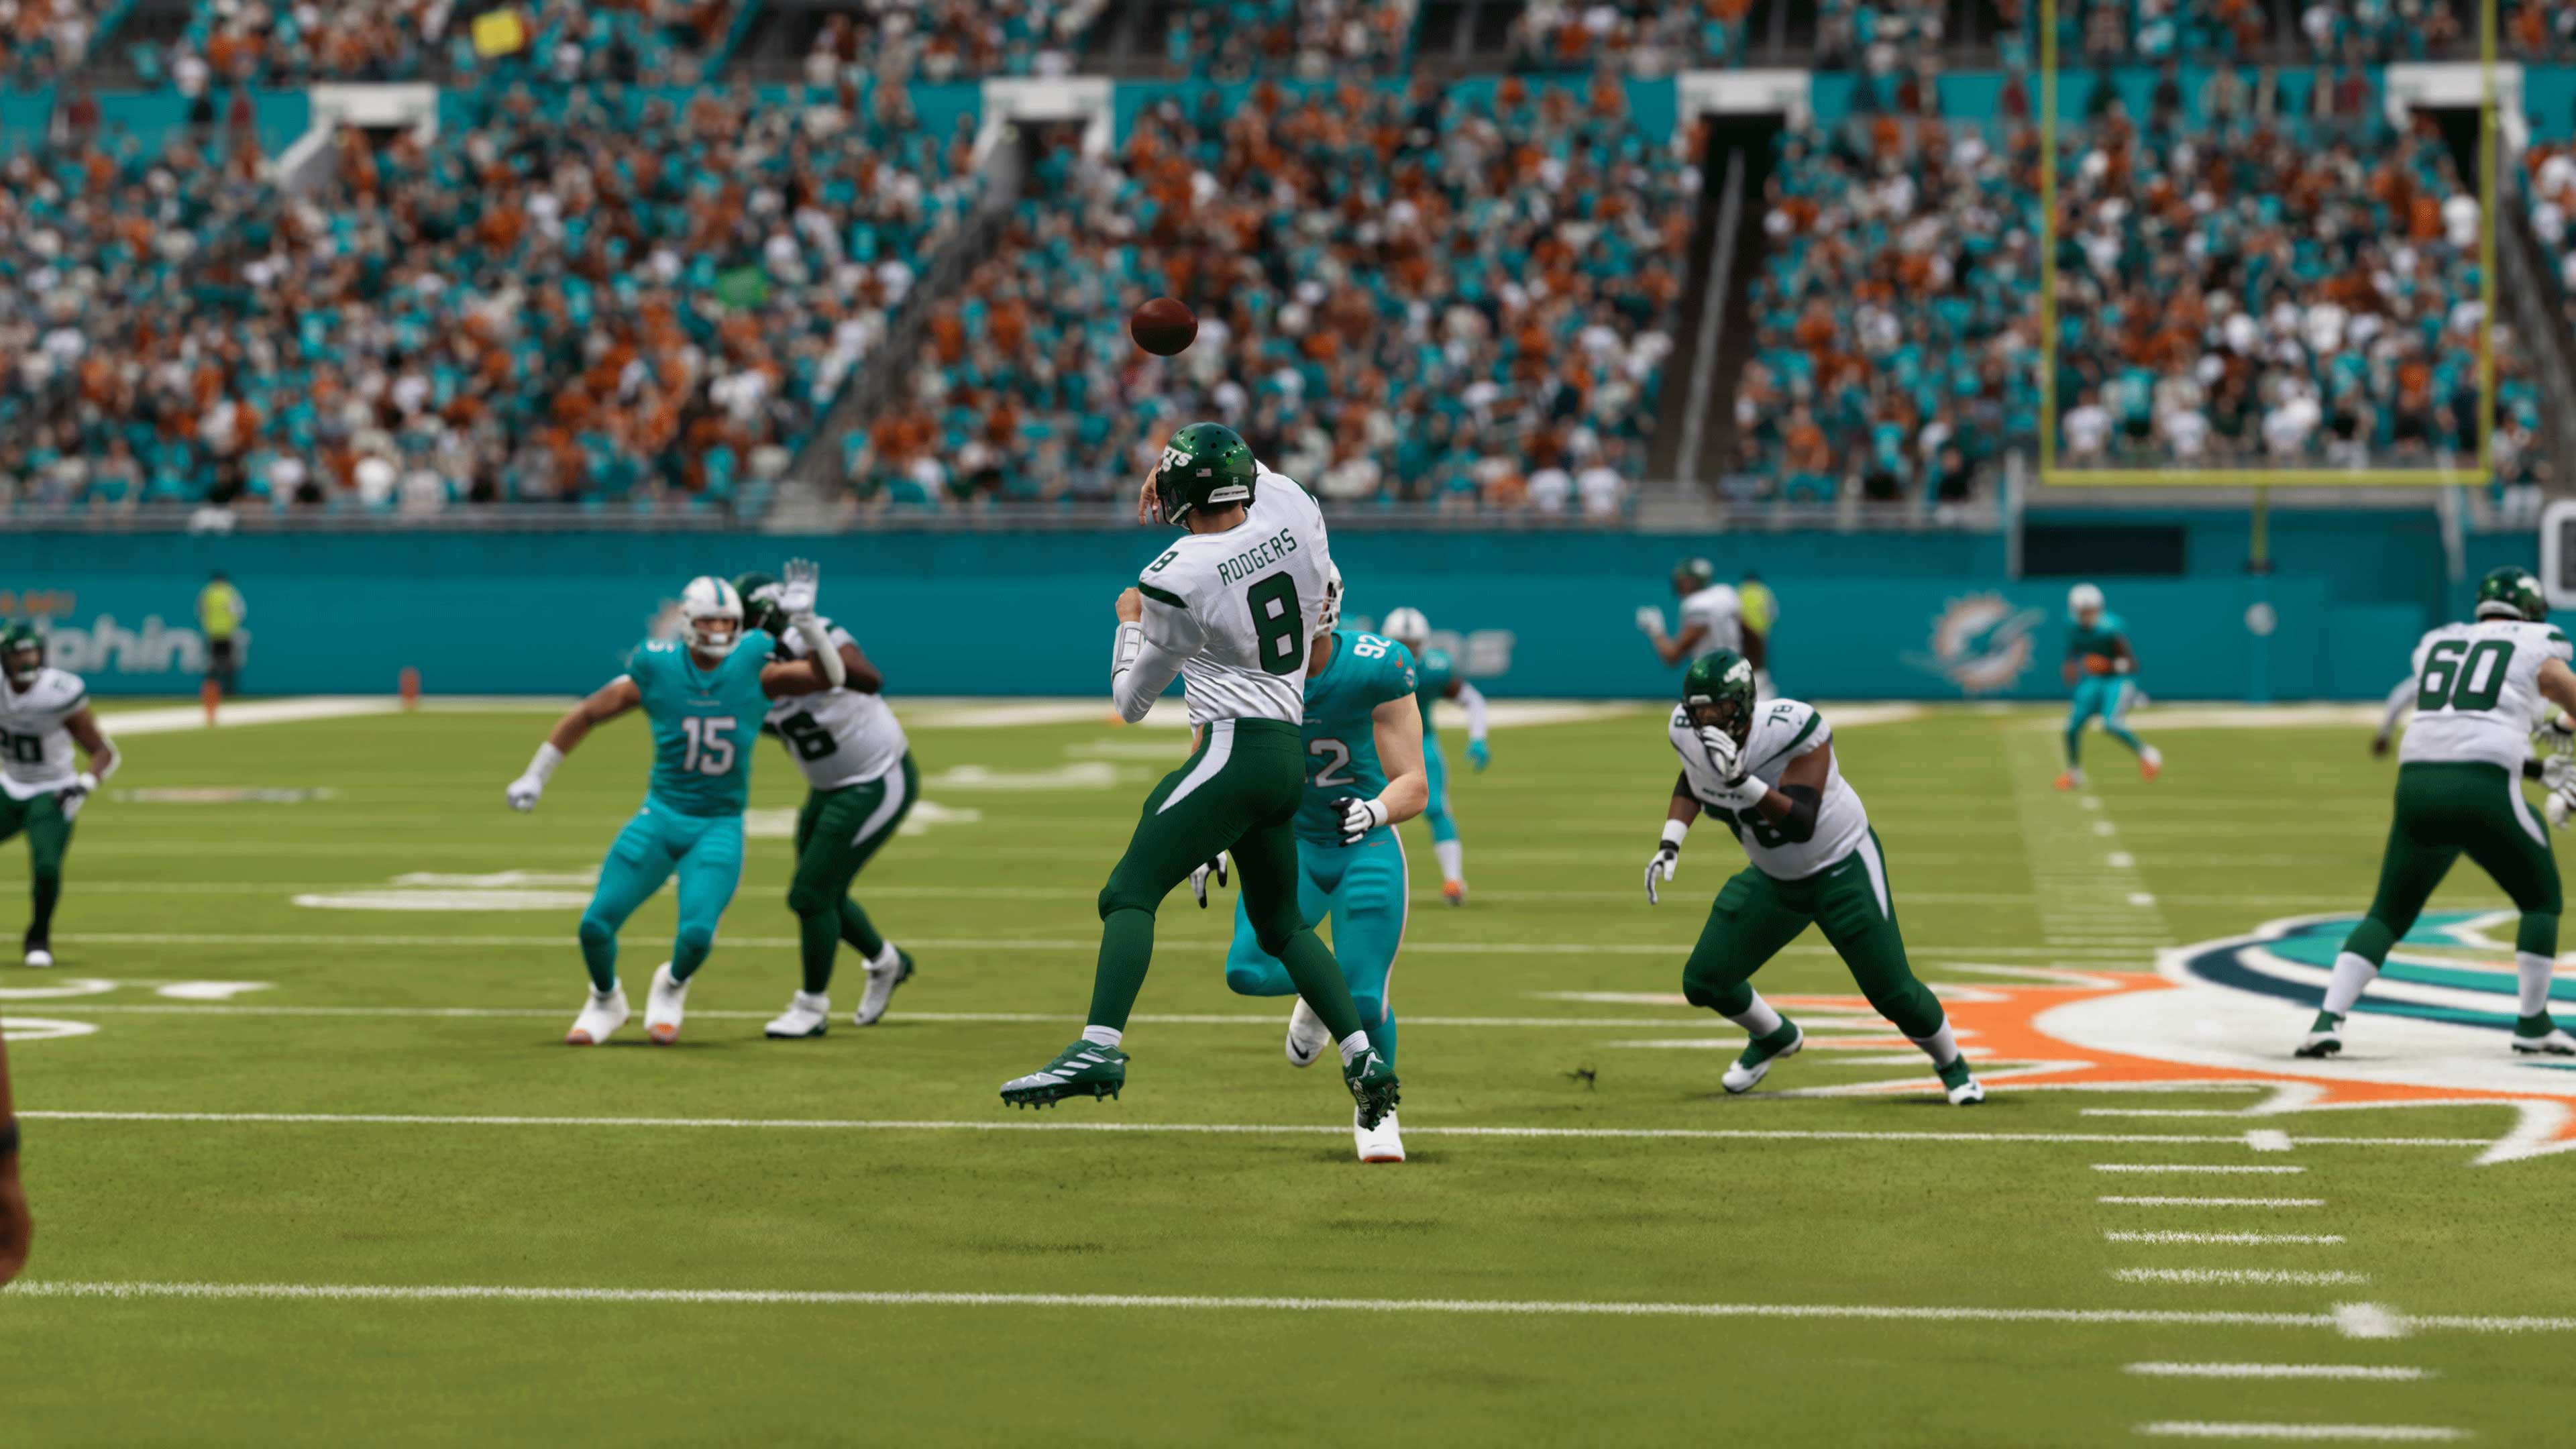 Madden NFL 24 and GTAV Top the PS5 PS Store Download Charts in August